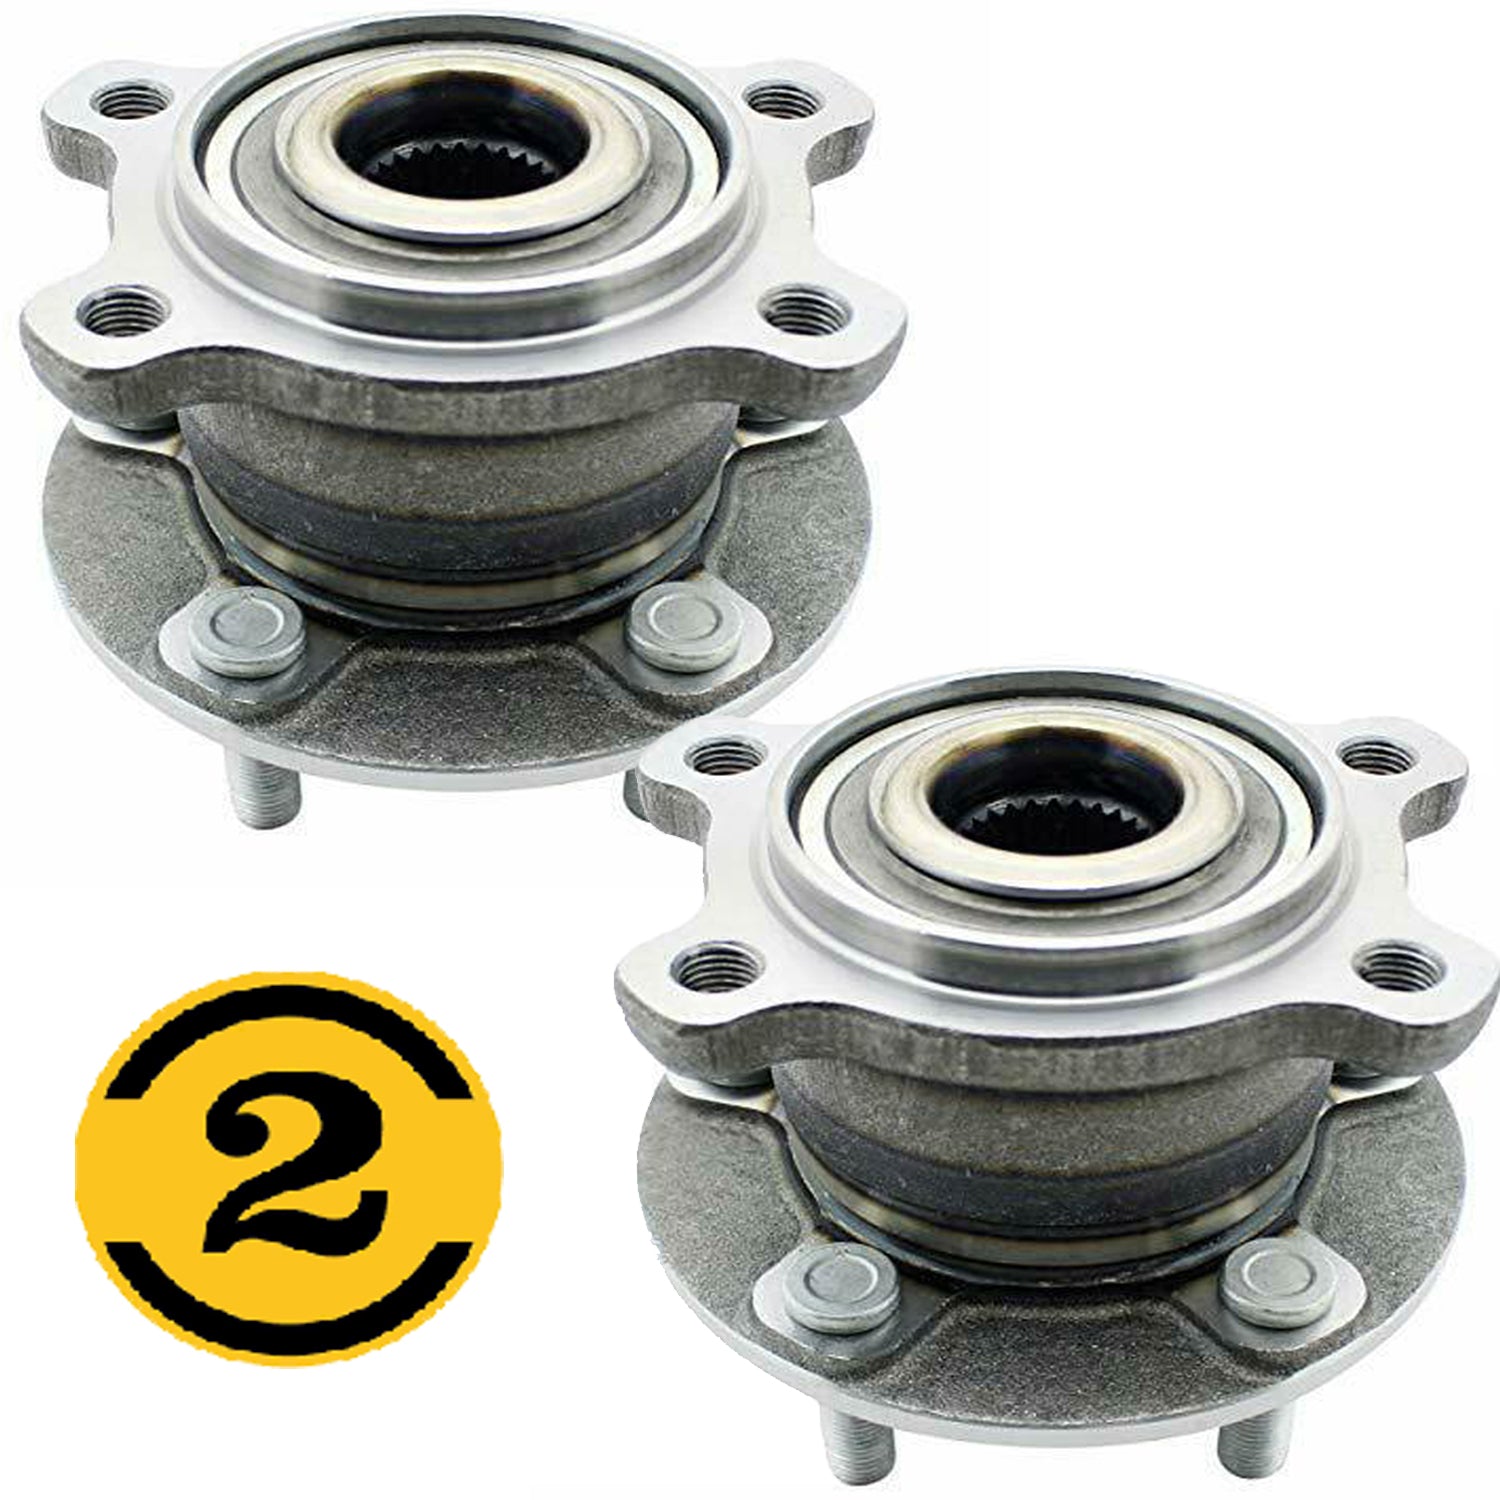 MotorbyMotor 512500 Rear Wheel Bearing and Hub Assembly with 5 Lugs Fits for 2013-2018 Ford Escape, 2015-2016 Lincoln MKC Low-Runout OE Directly Replacement Hub Bearing-2PK